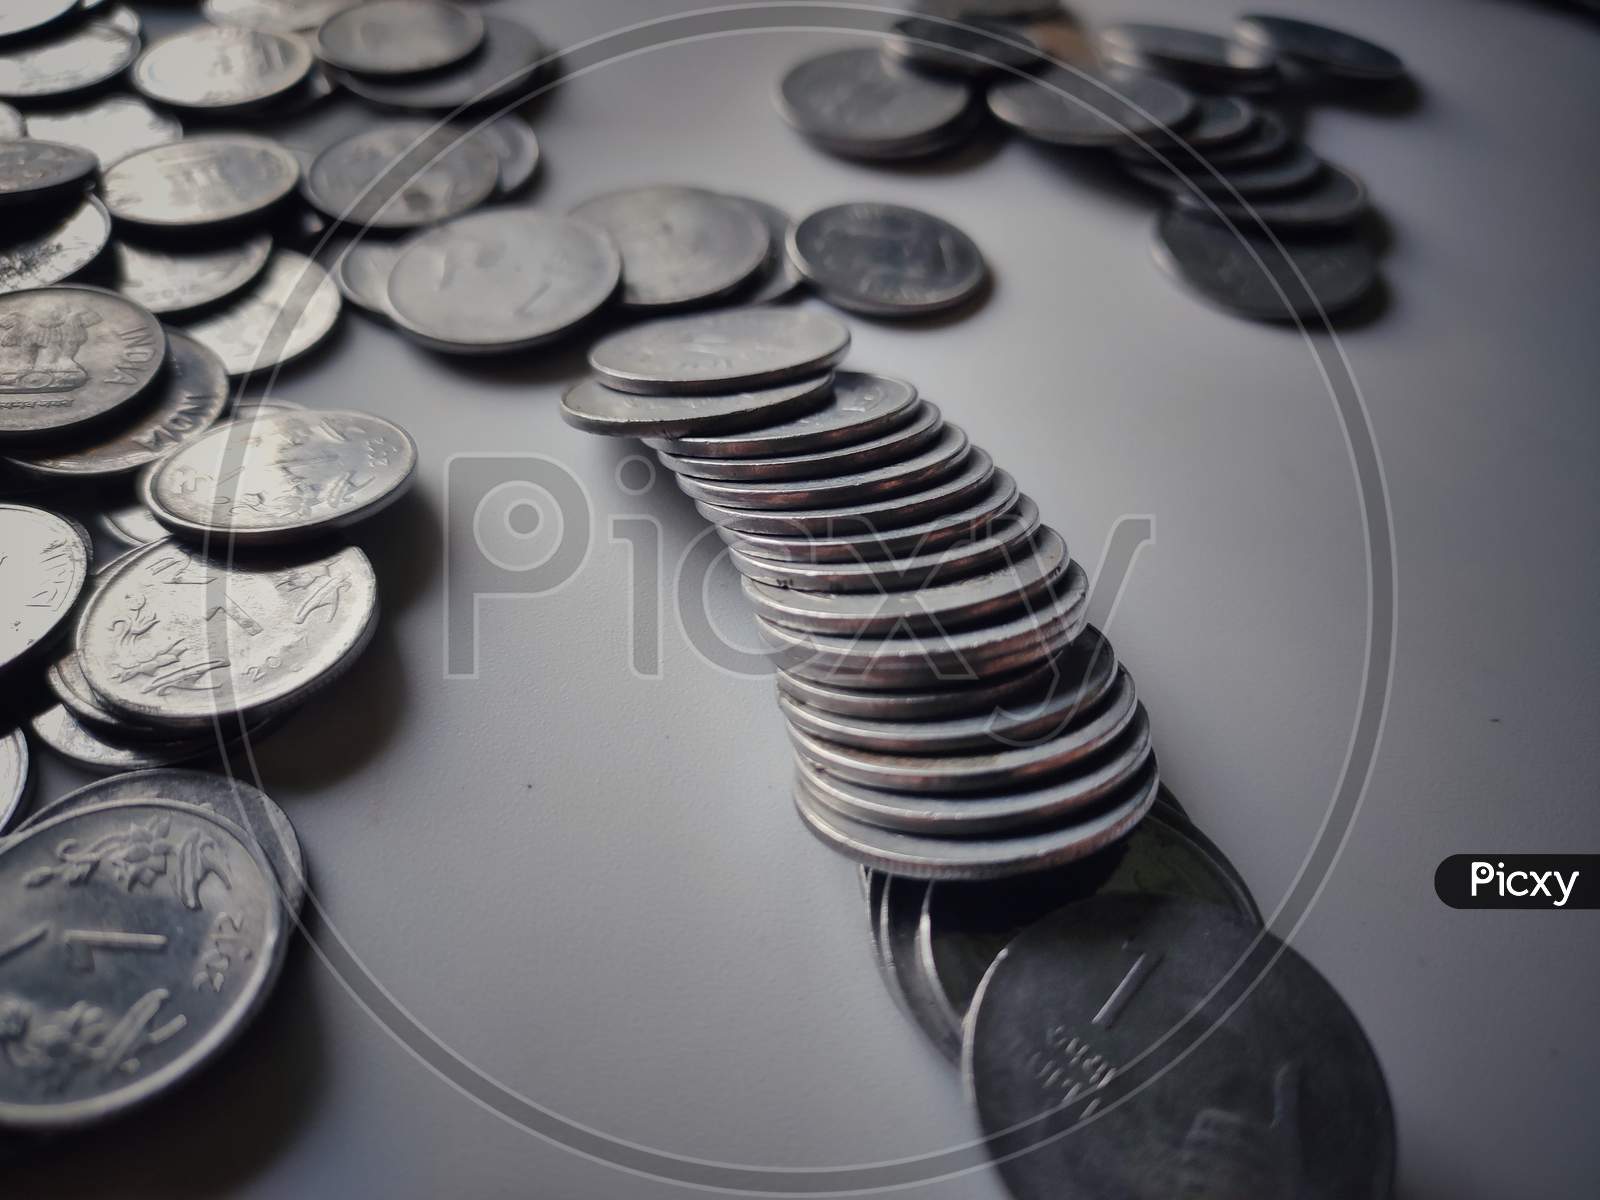 this is a picture of coins on white background.this is a collection of old coins.